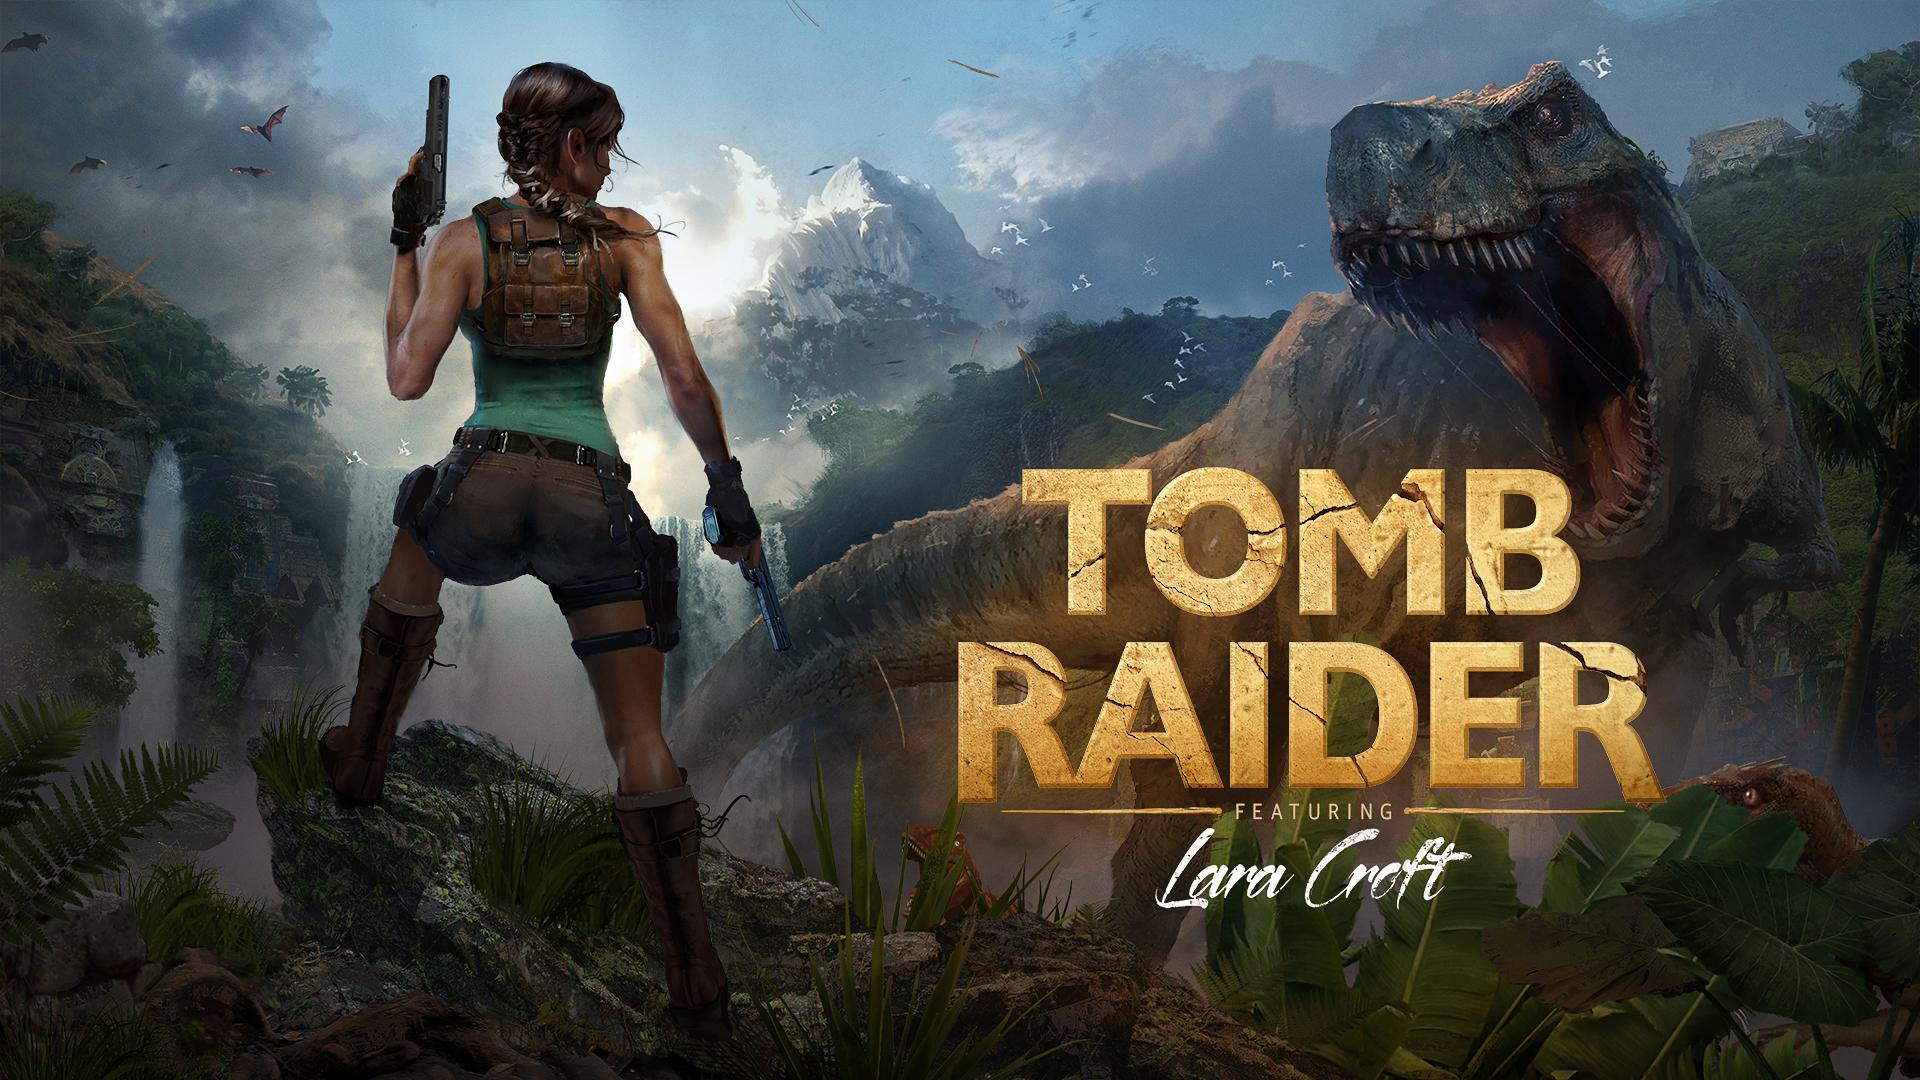 Join the Society of Raiders to receive members-only wallpapers to show off your Tomb Raider fandom